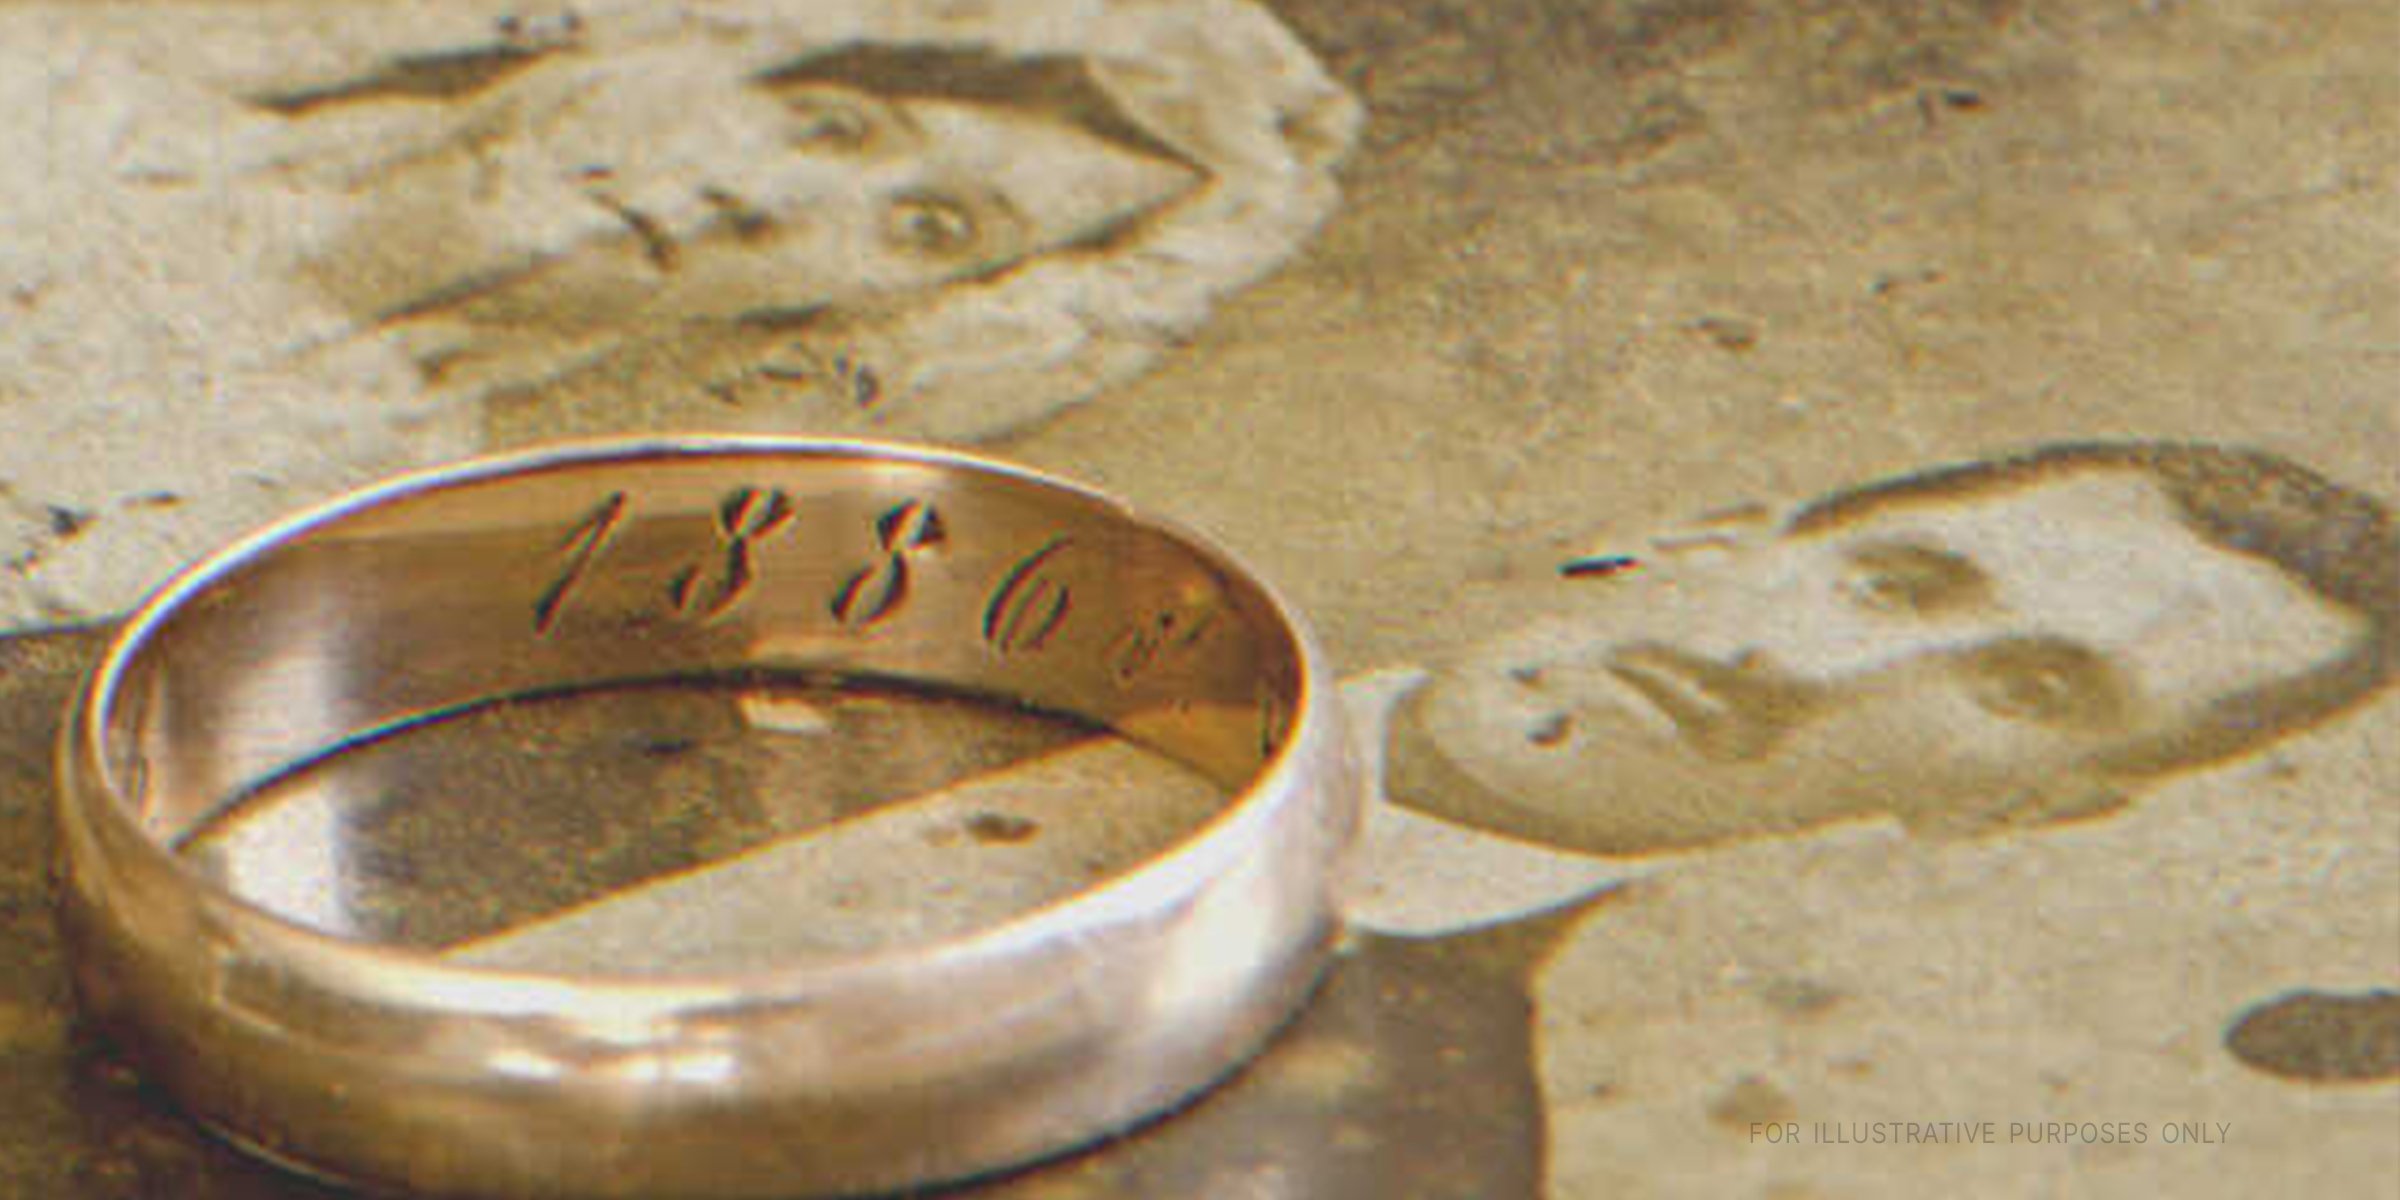 An inscribed wedding band on an old photograph | Source: Shutterstock